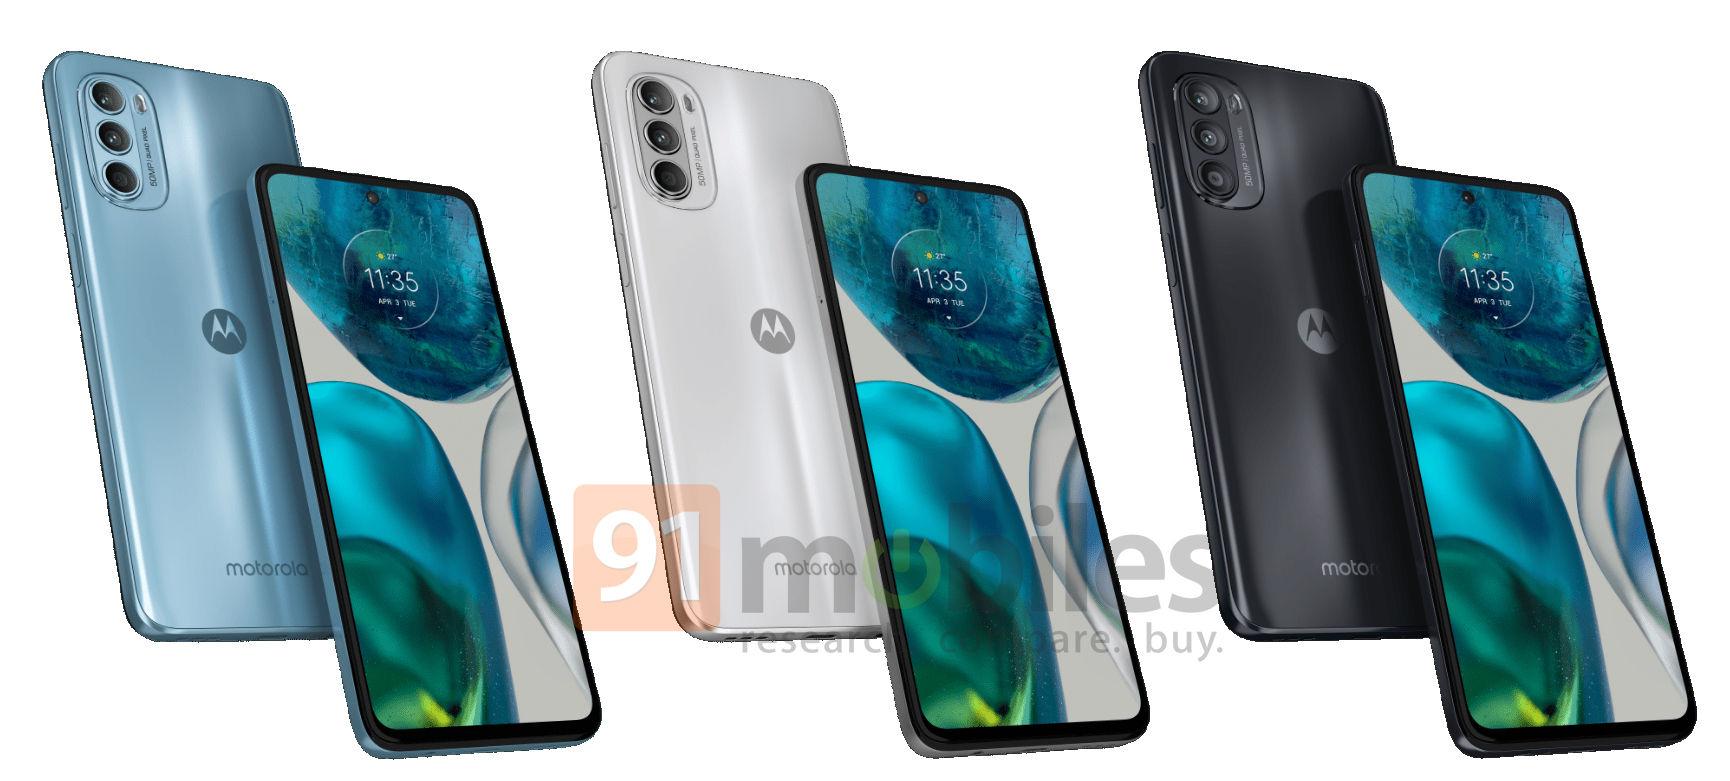 Exclusive Motorola Moto G52 First Image And Full Specs